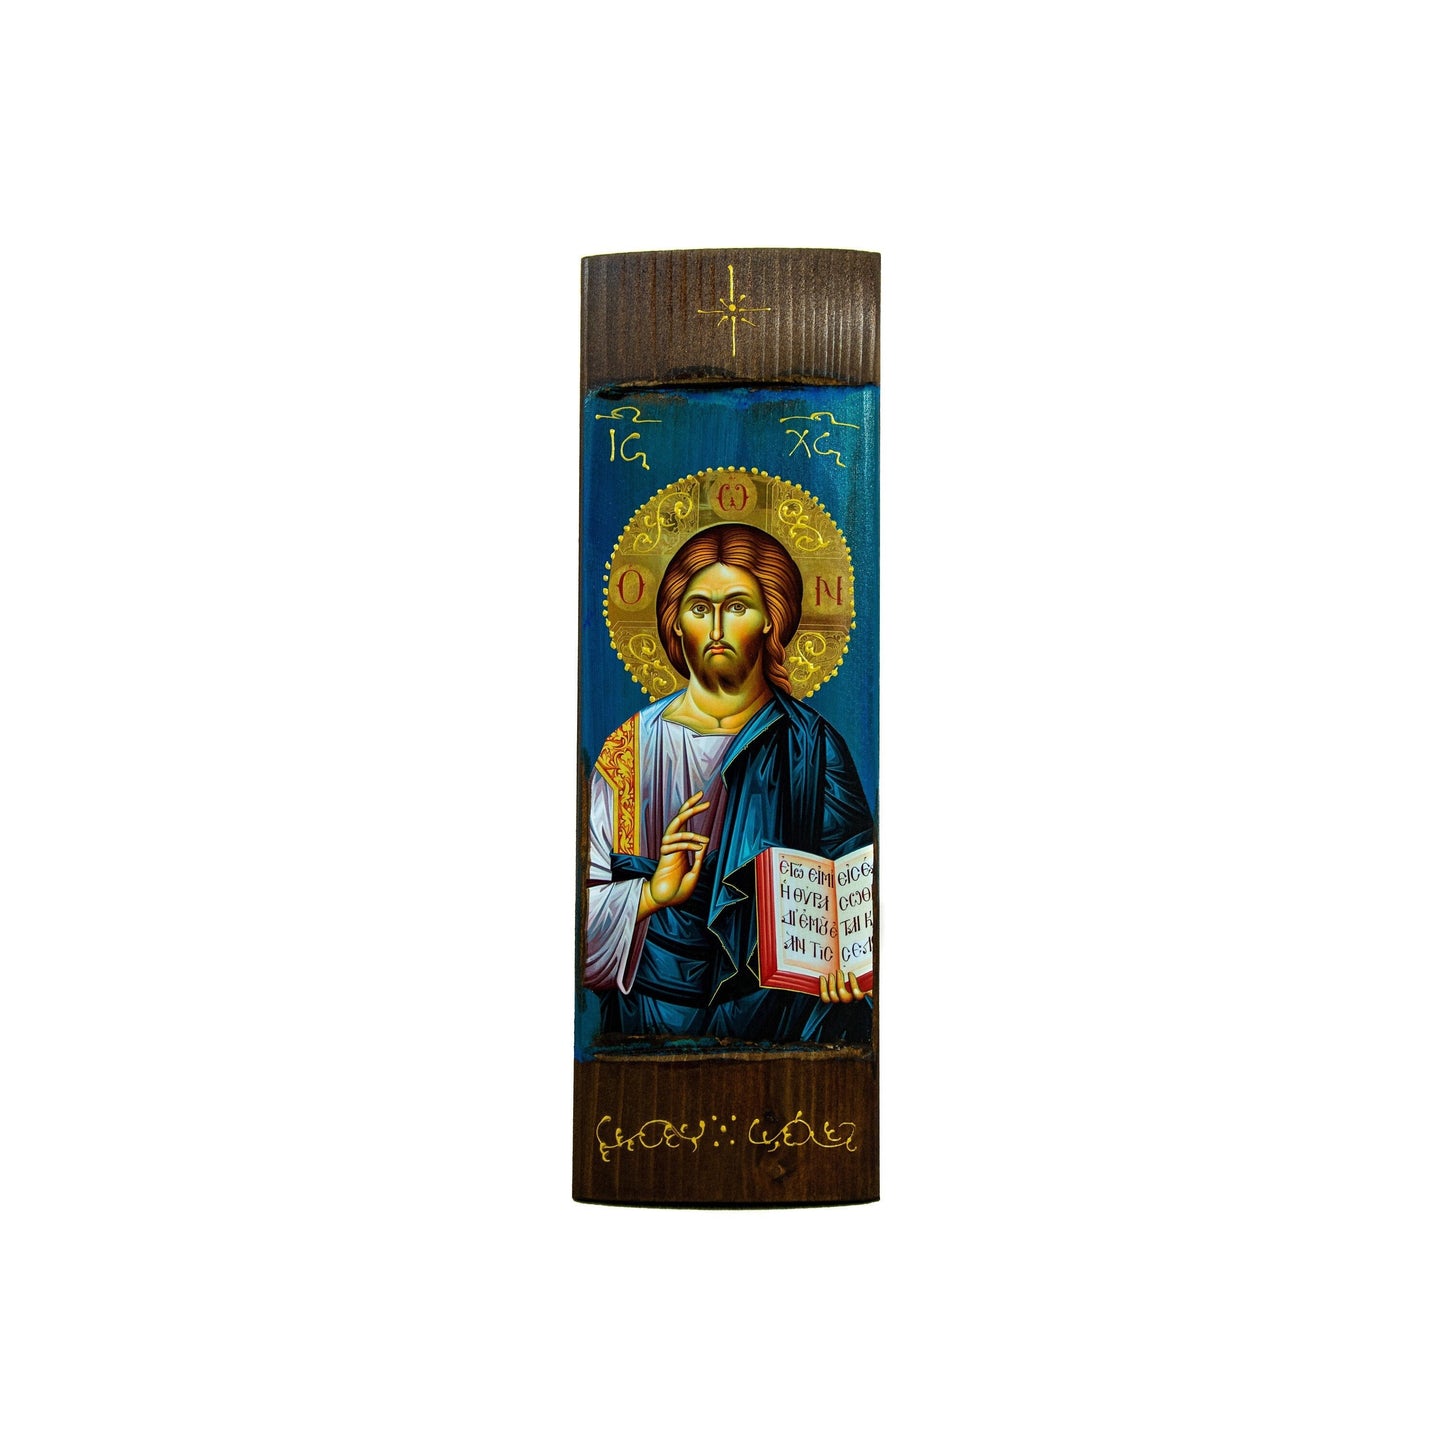 Jesus Christ icon, Handmade Greek Orthodox Icon of Our Lord Blessing, Byzantine art wall hanging wood plaque icon, religious decor TheHolyArt